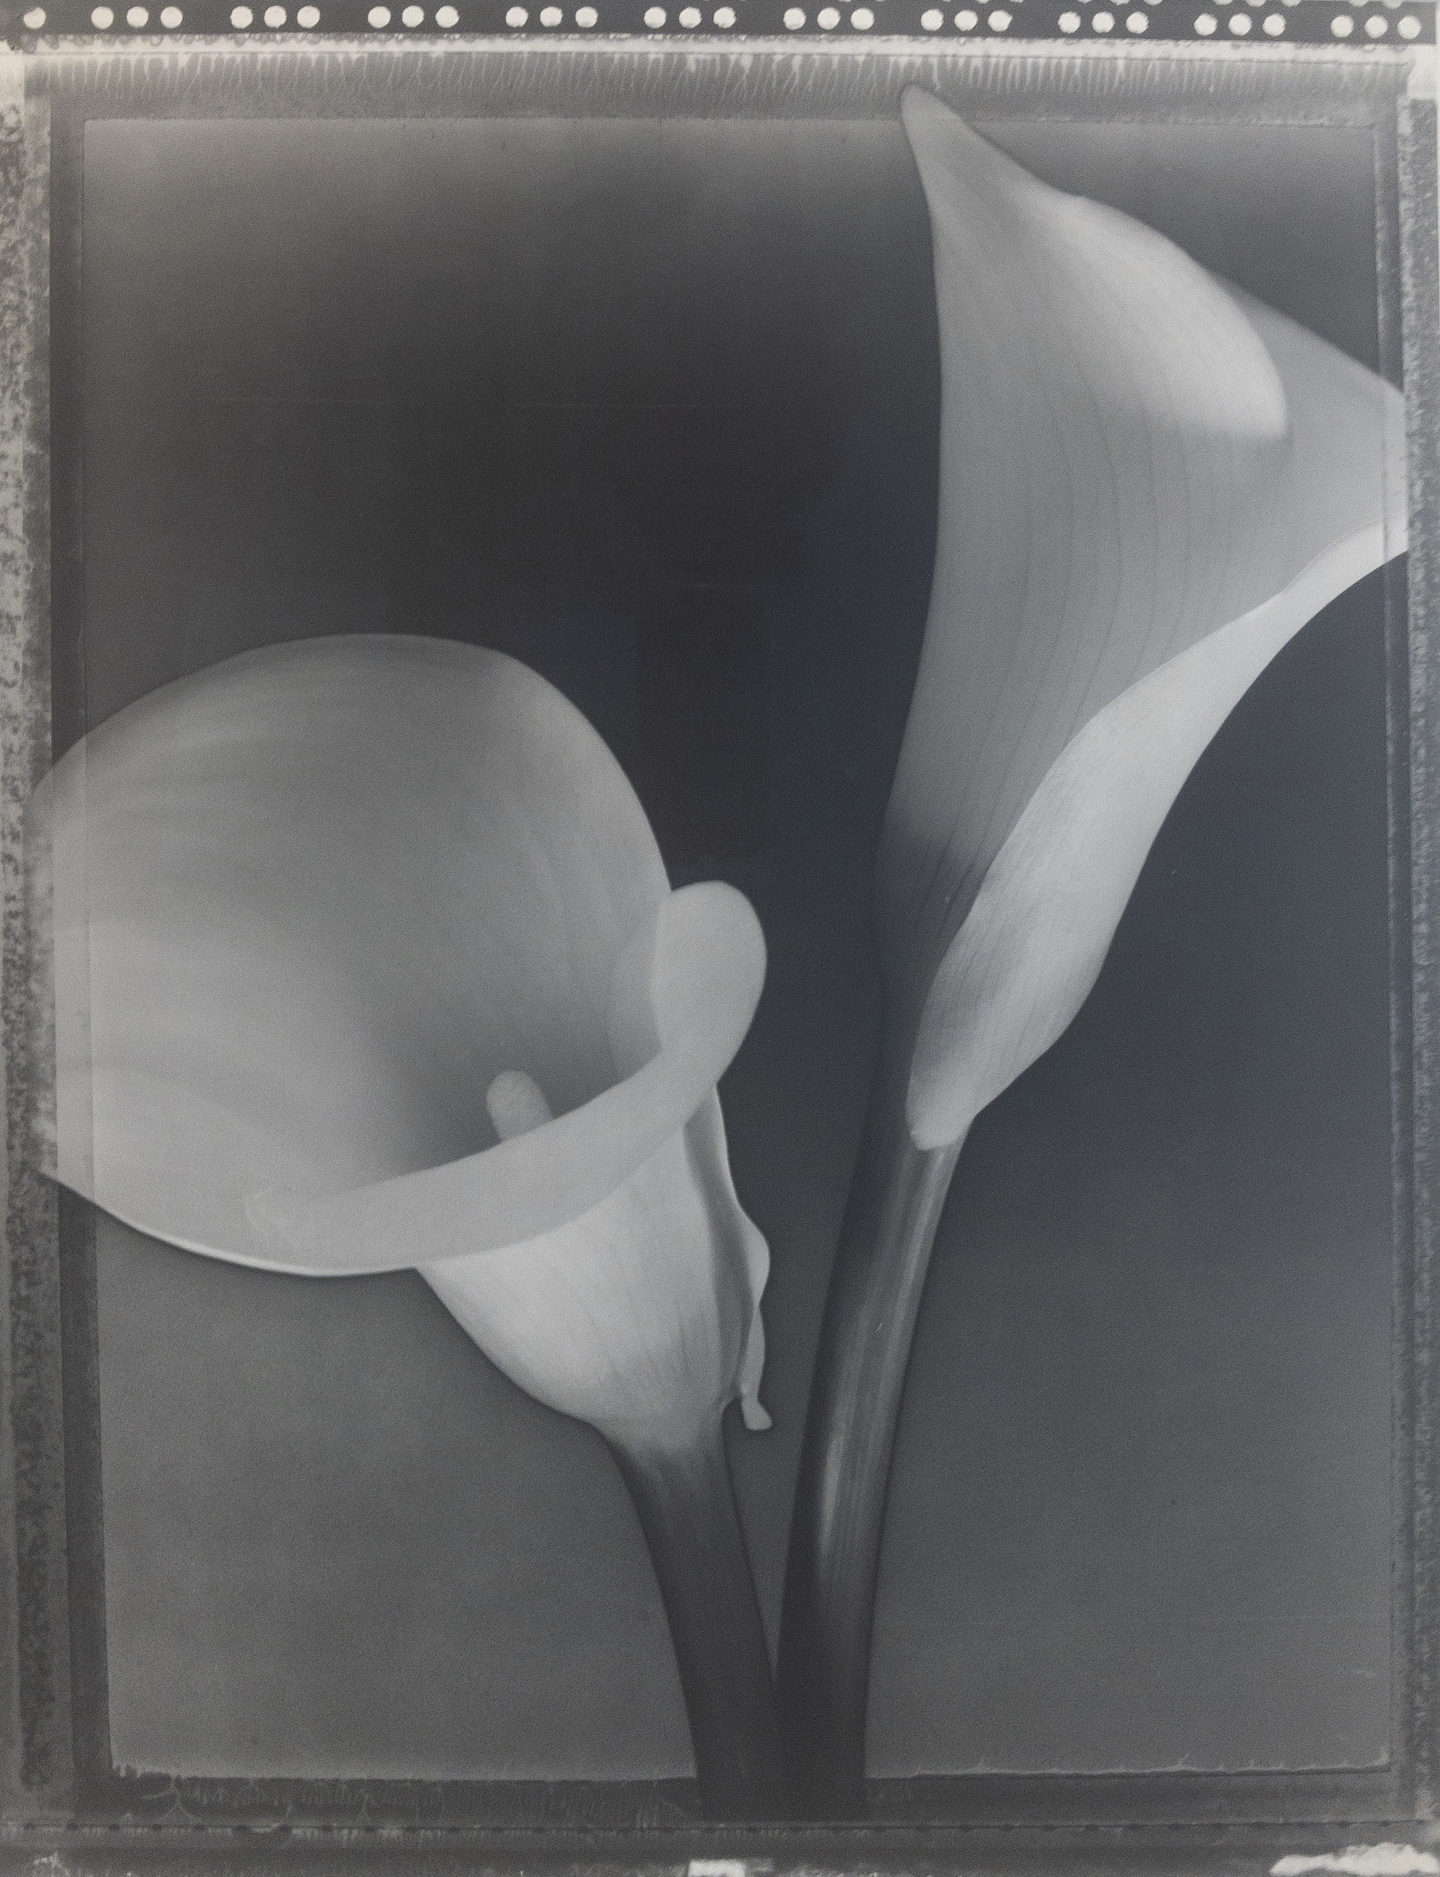 Tom Baril, Solarized Calla Lilies, 1995, Catherine Couturier Gallery